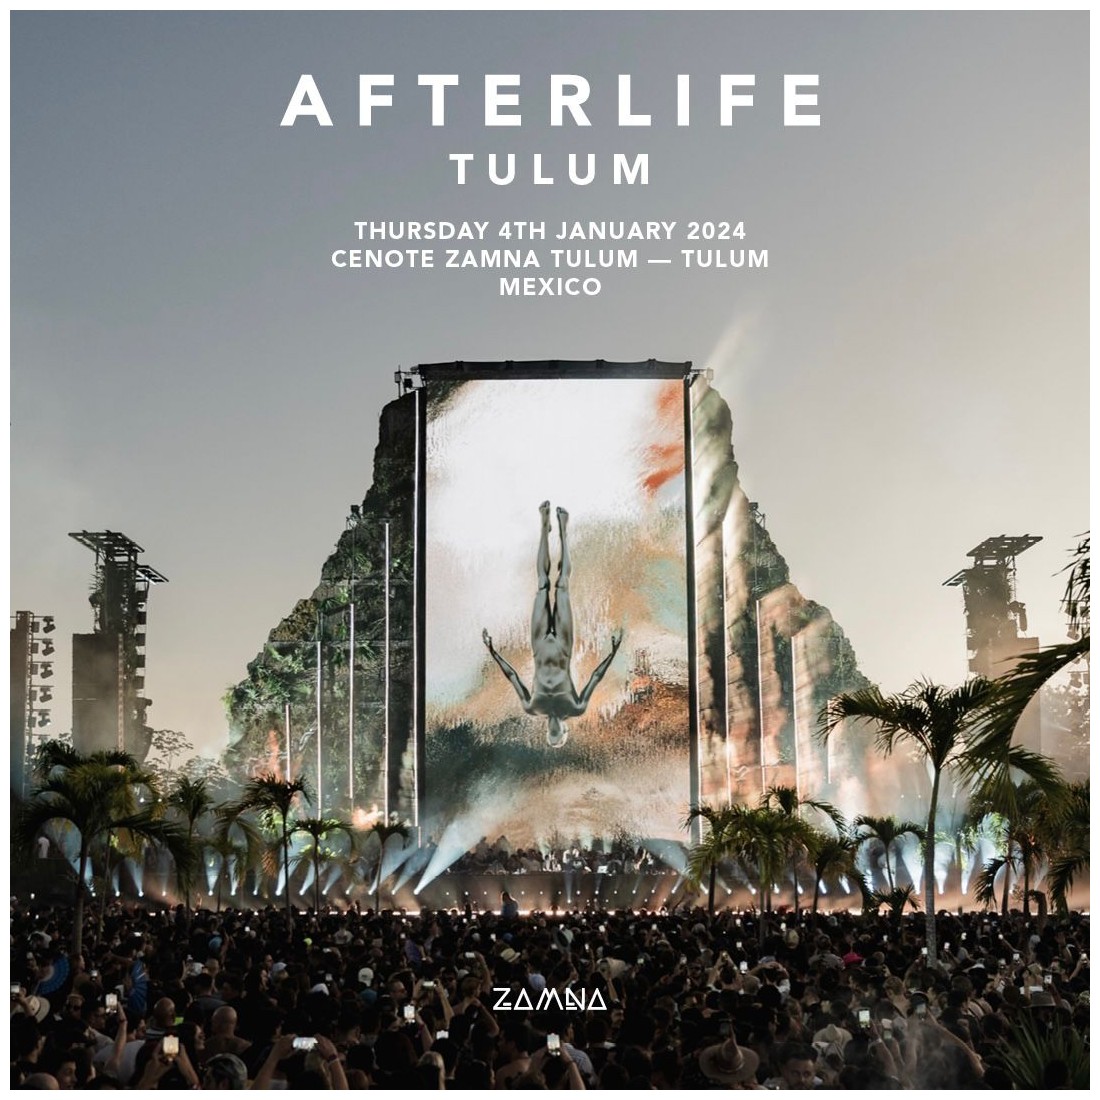 AFTERLIFE Tulum JANUARY 4 -- Exchange Multi-pass VIP (SOLD OUT)